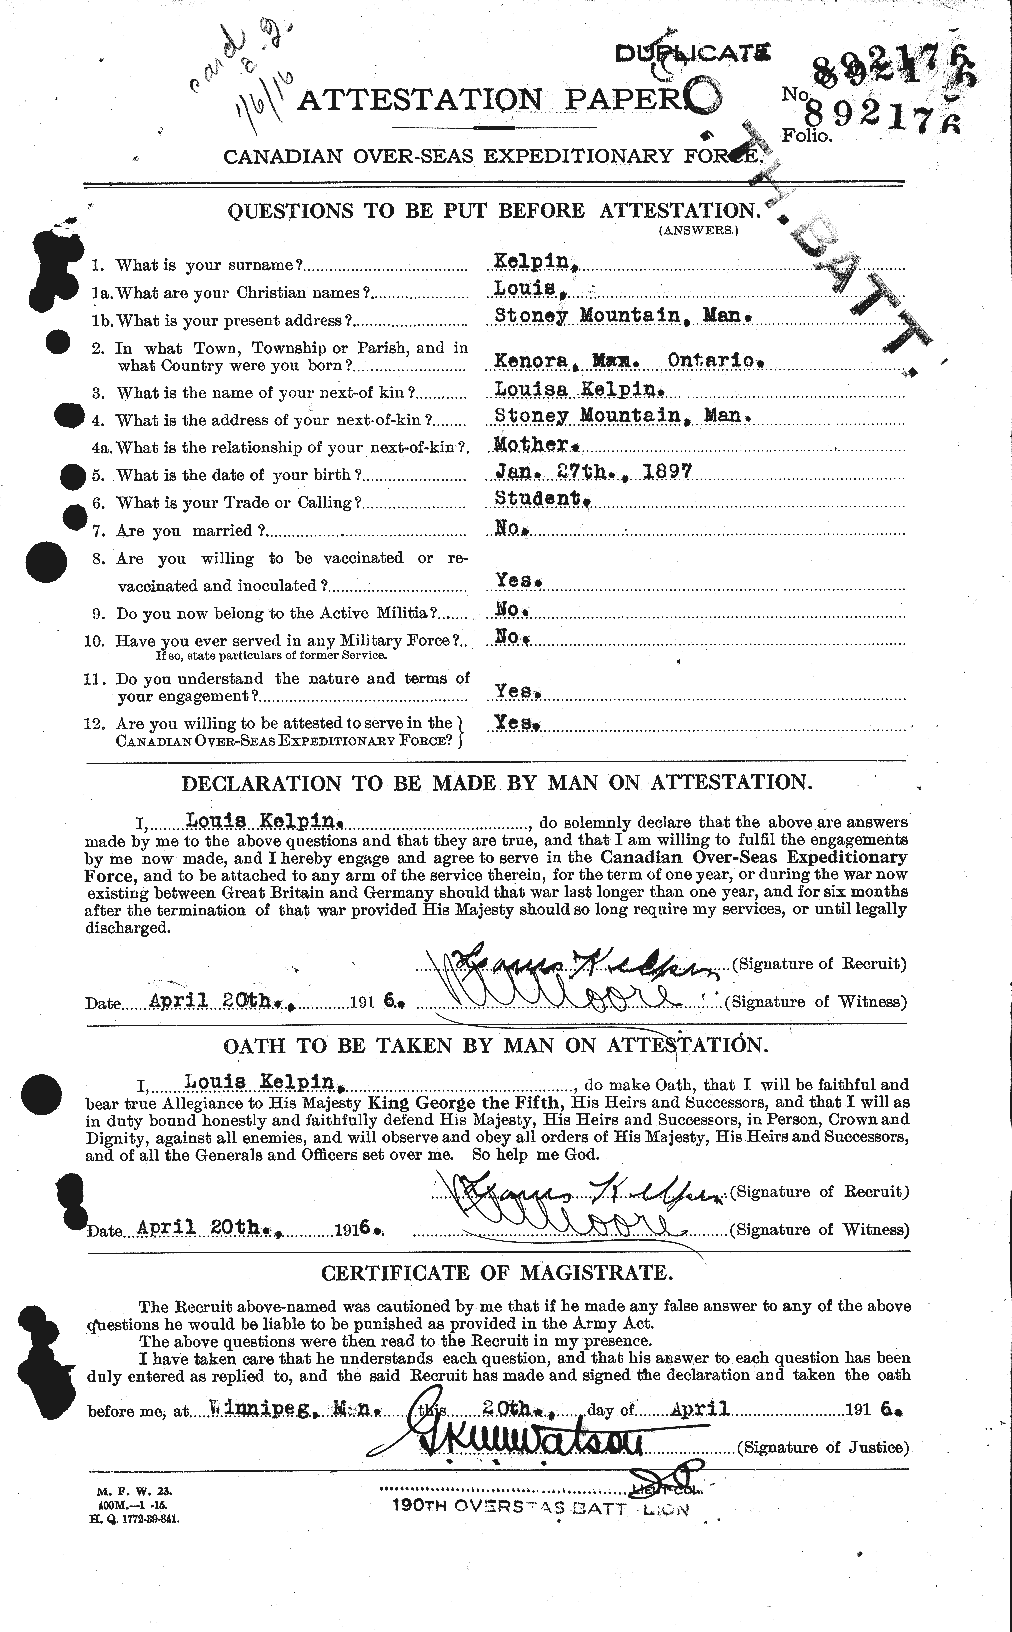 Personnel Records of the First World War - CEF 429904a